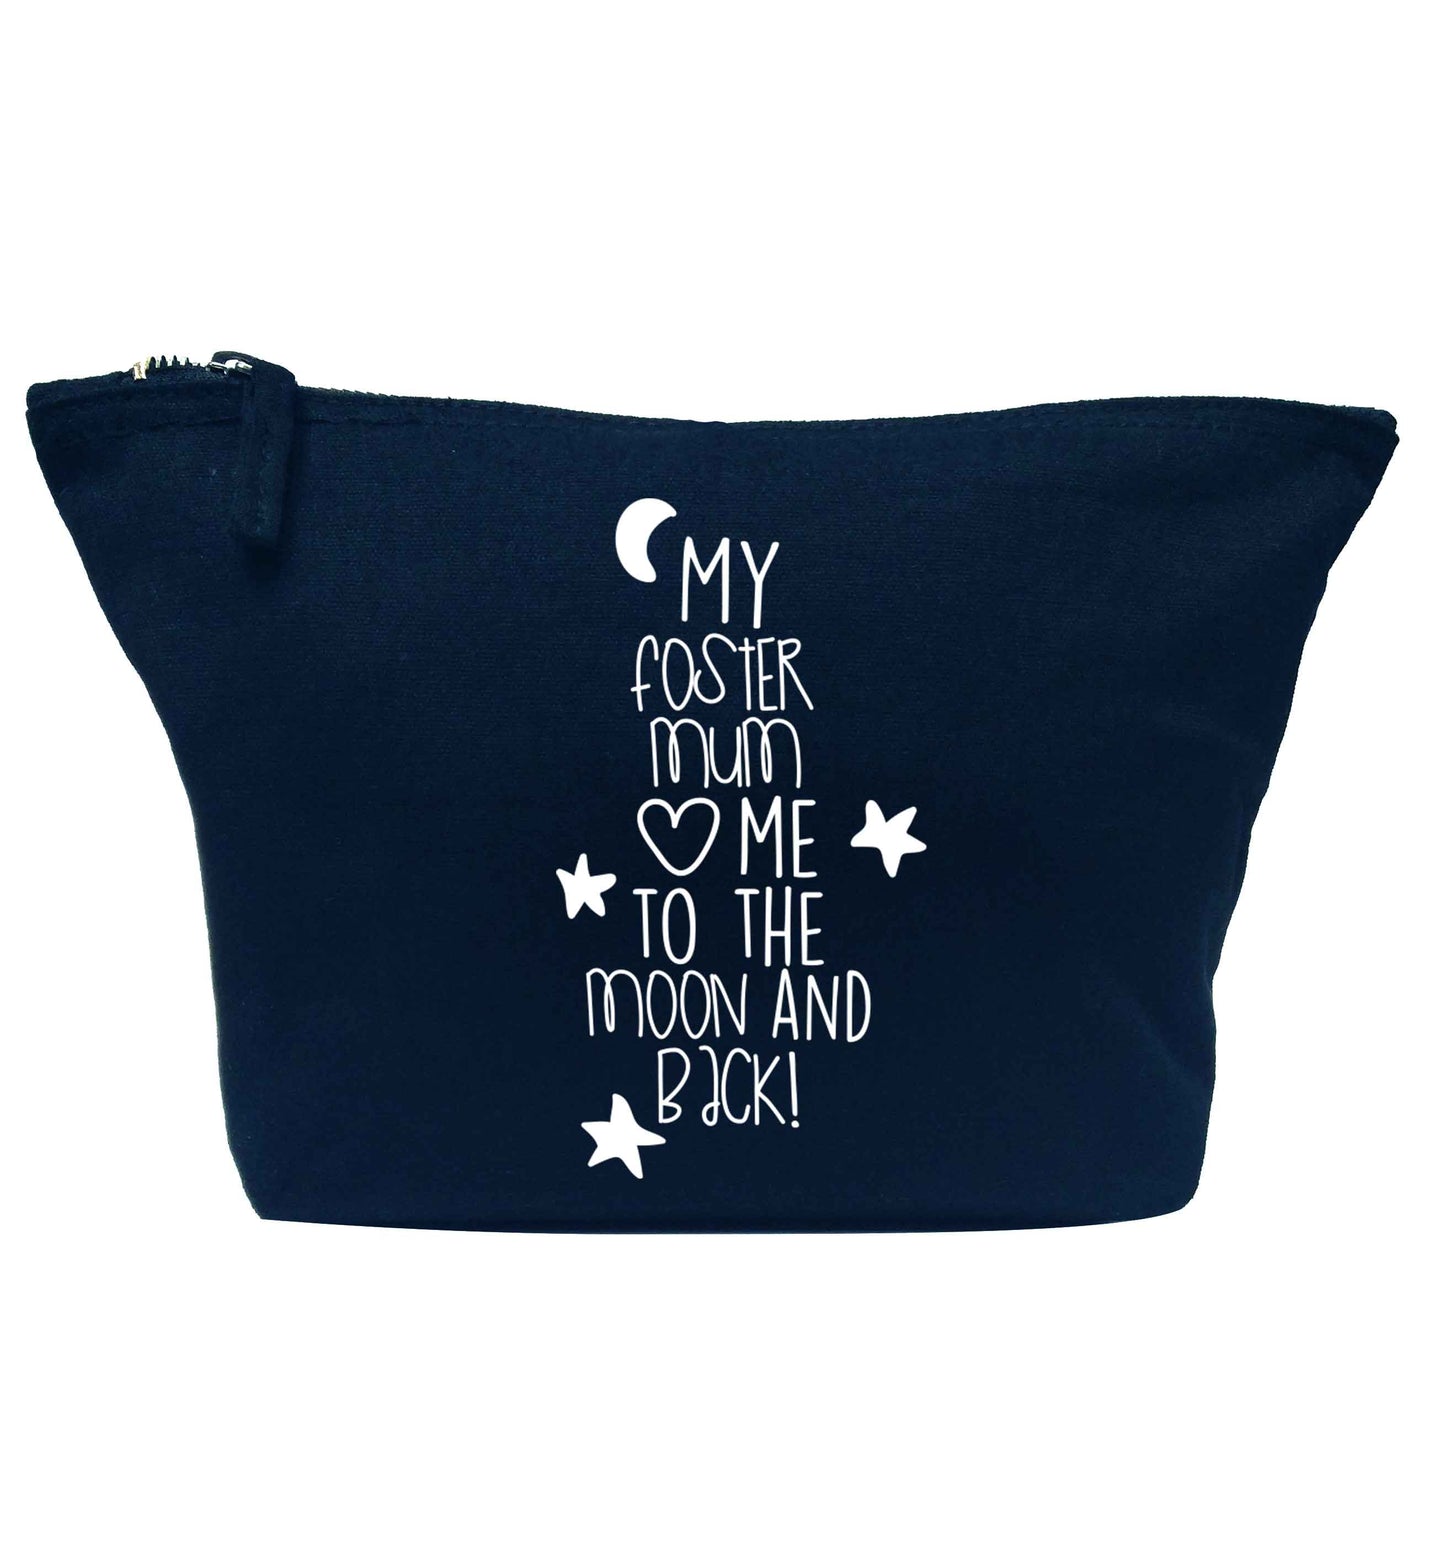 My foster mum loves me to the moon and back navy makeup bag